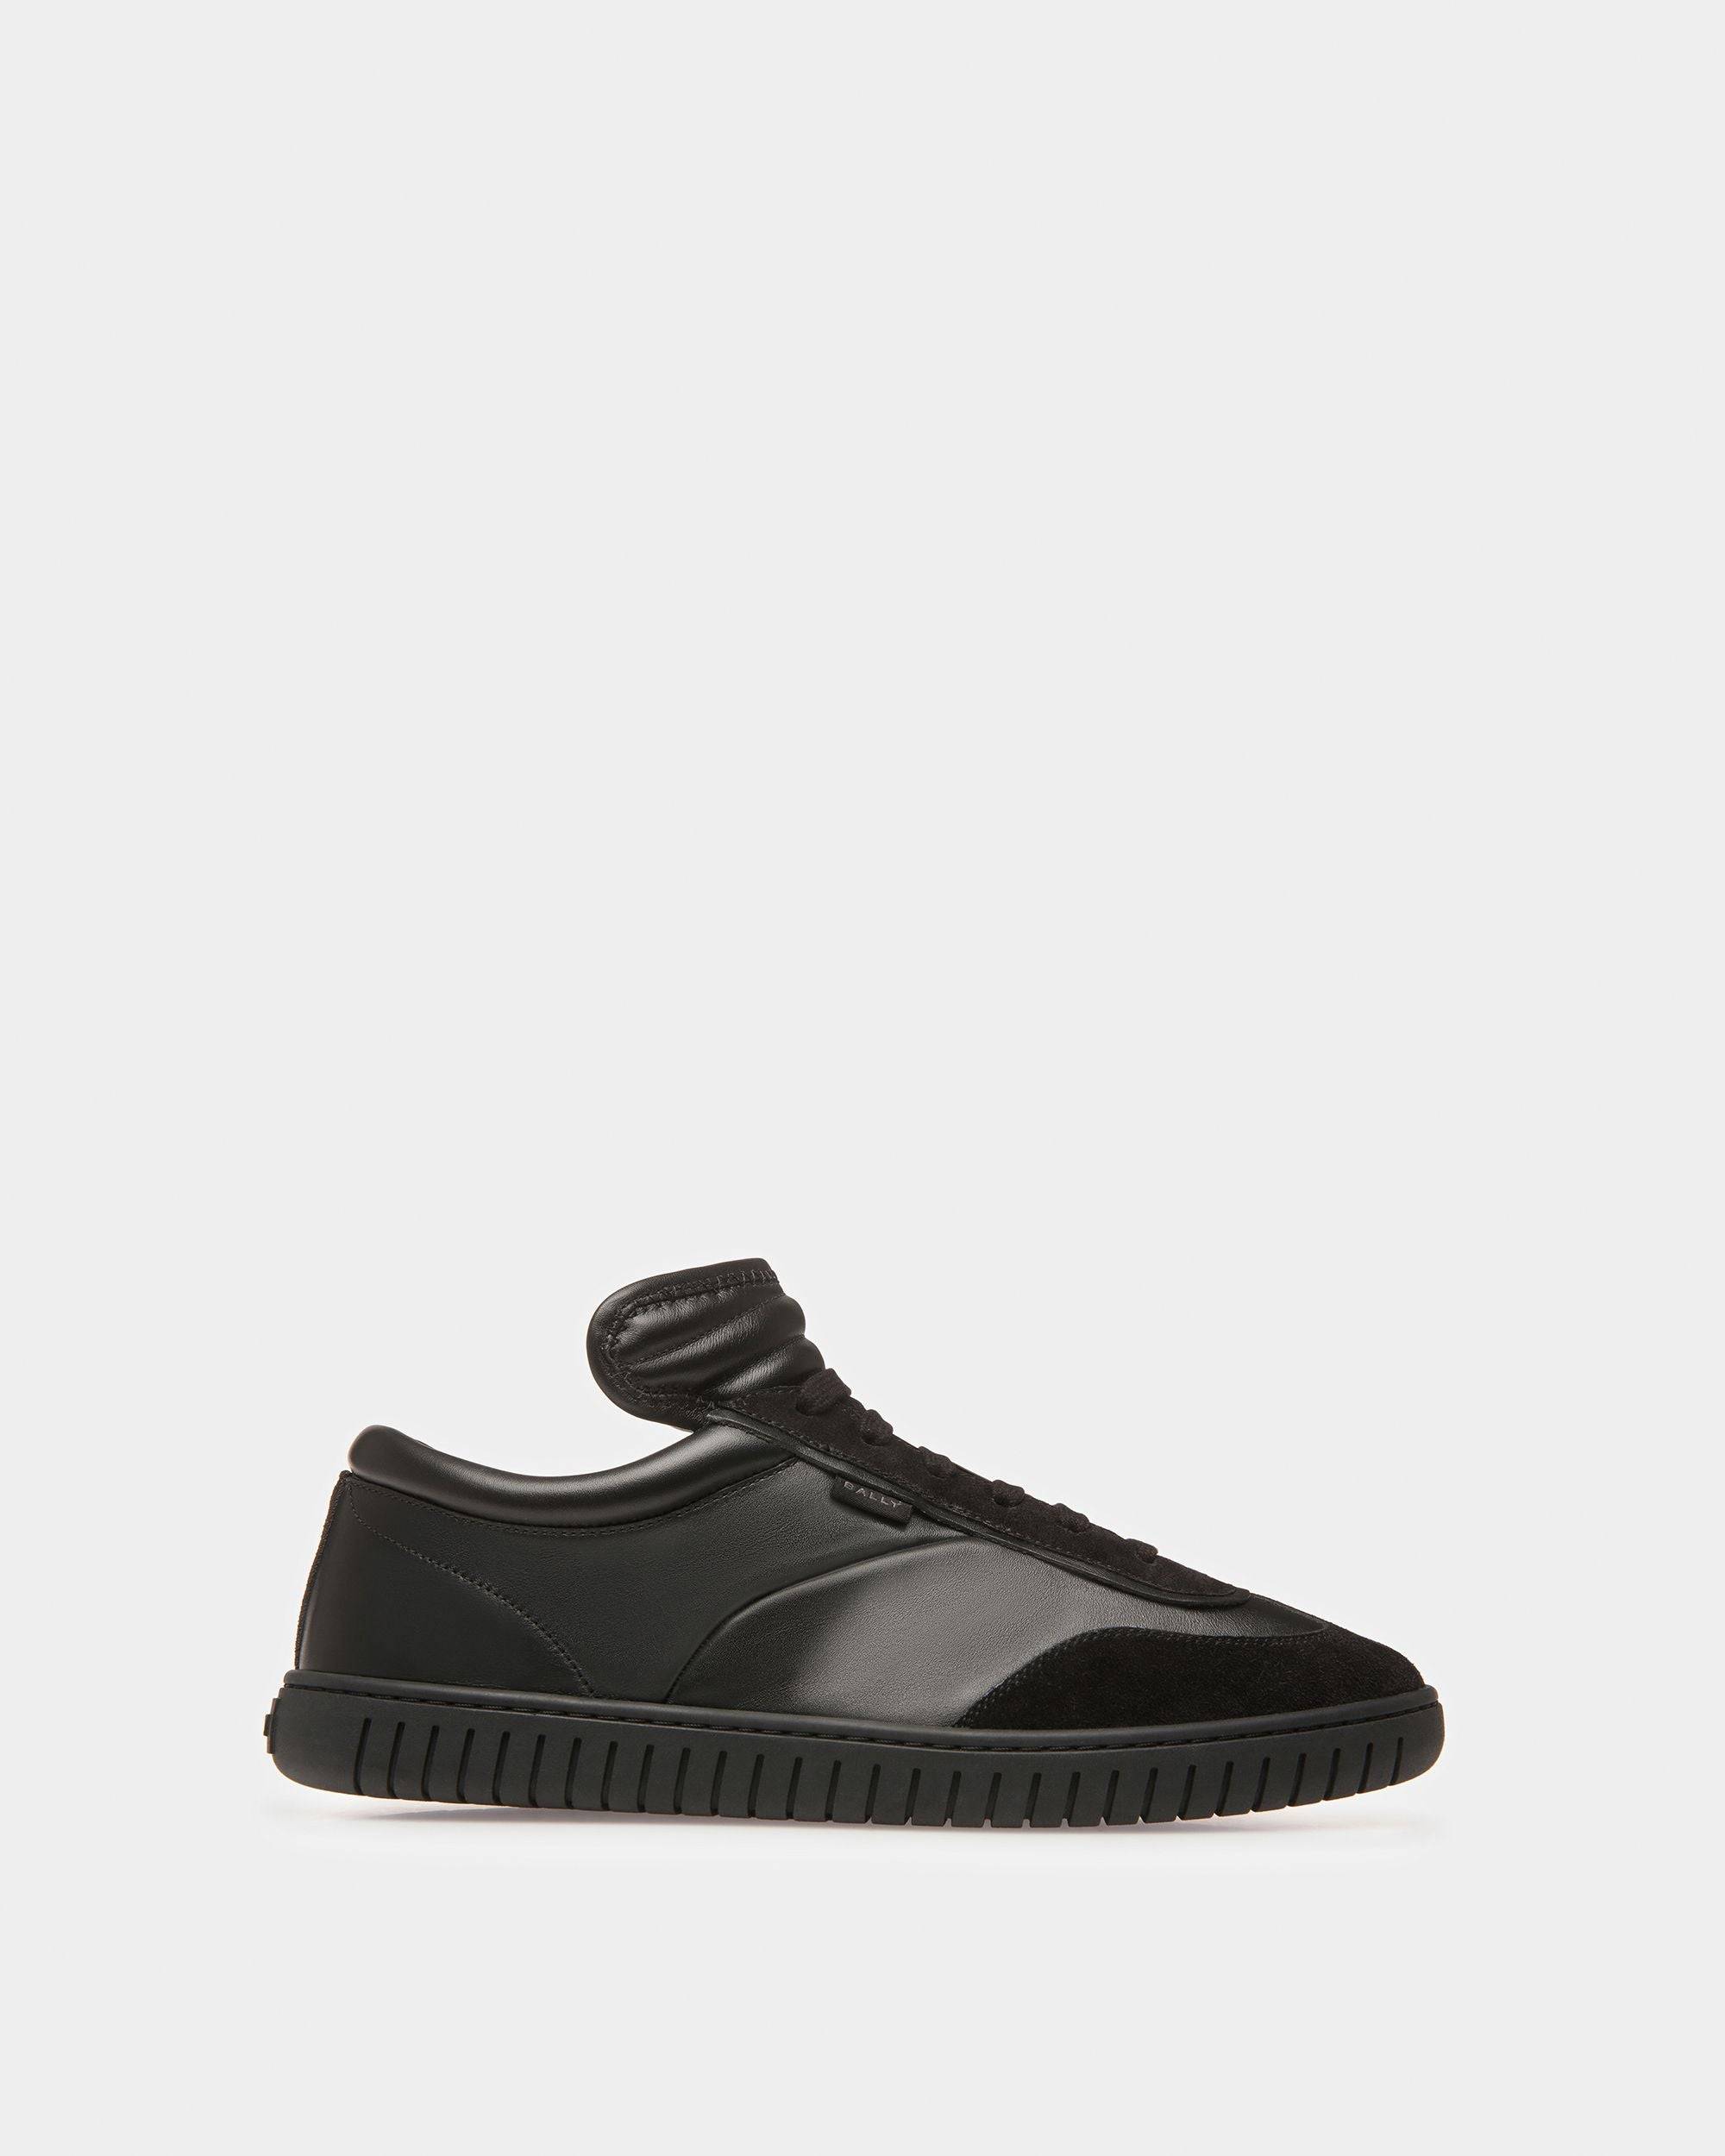 Men's Player Sneakers In Black Leather | Bally | Still Life Side